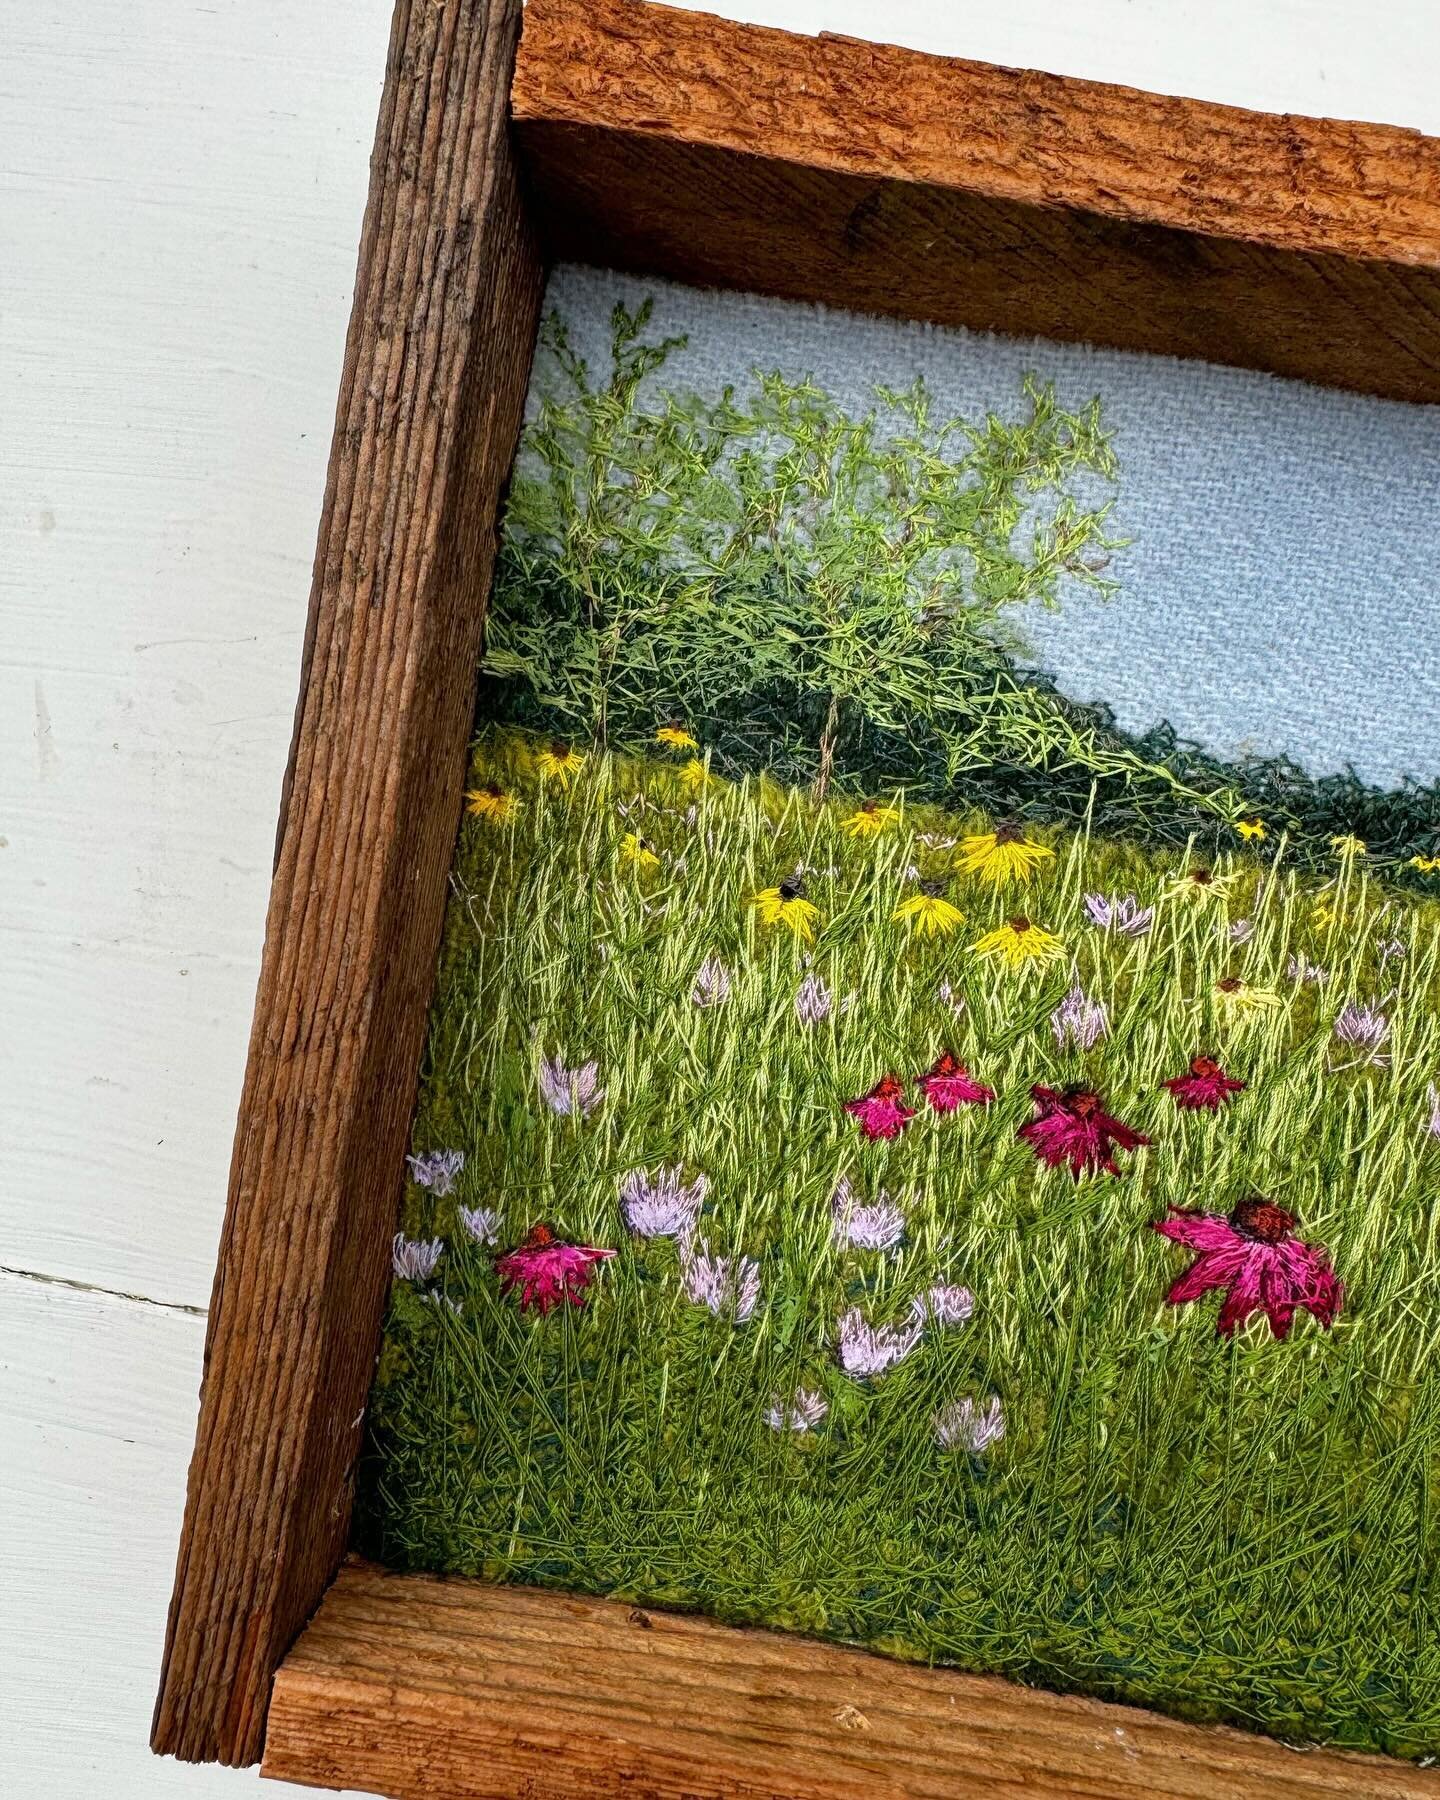 Fields of green 💚 Happy Saint Patrick&rsquo;s Day! 🍀☘️

#freemotionembroidery #embroidery #watercolor #wisconsin #wisconsinartist #art #wisconsinart #wisconsinphotography #landscape #landscapephotography #roadside #roadsideattraction #wildflowers #